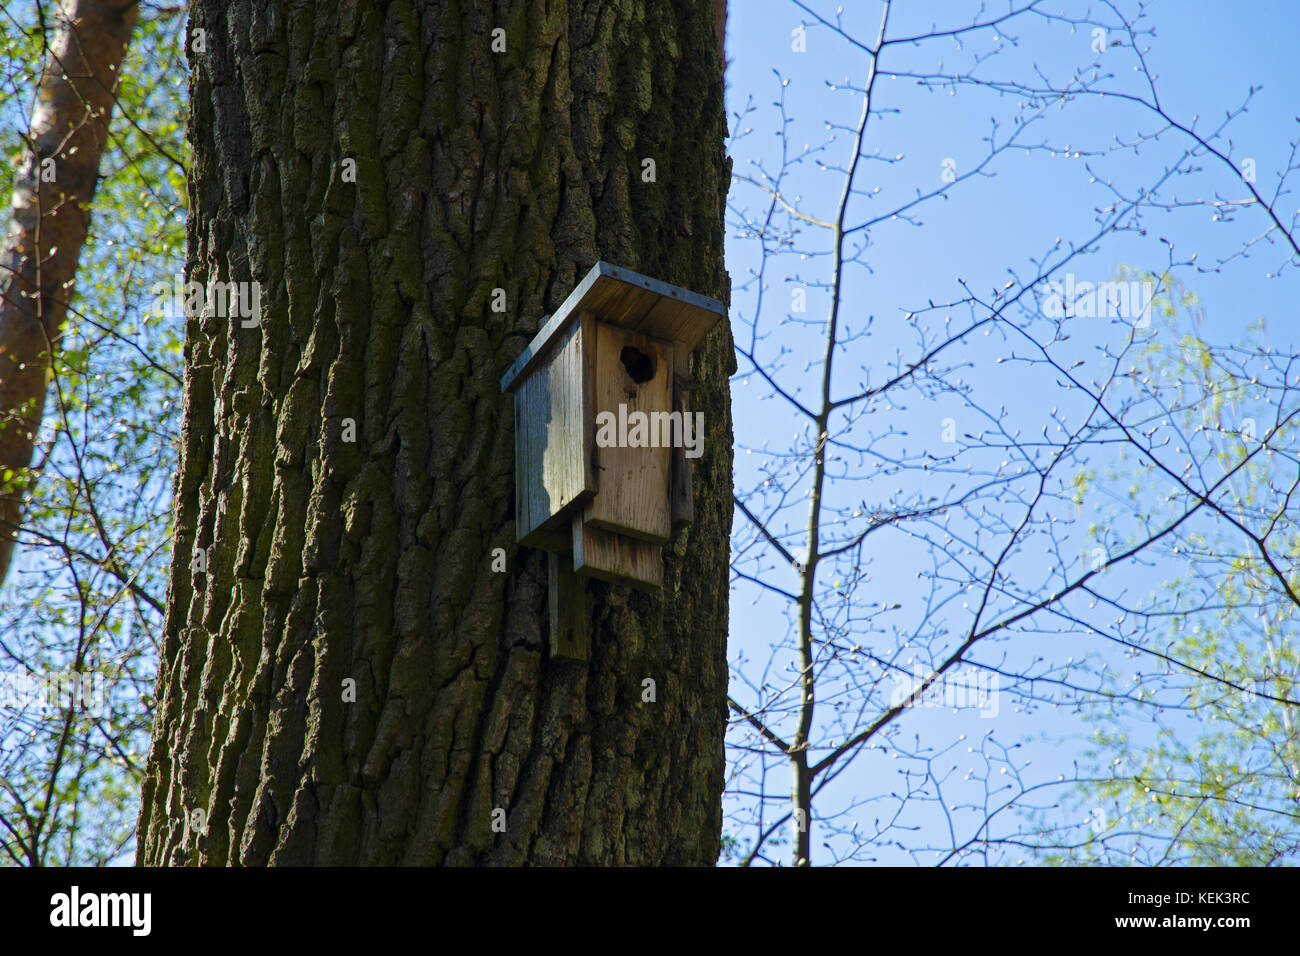 View of a wooden birdhouse mounted on a tree trunk in the spring and summer in the woods under a blue sky on a sunny day Stock Photo